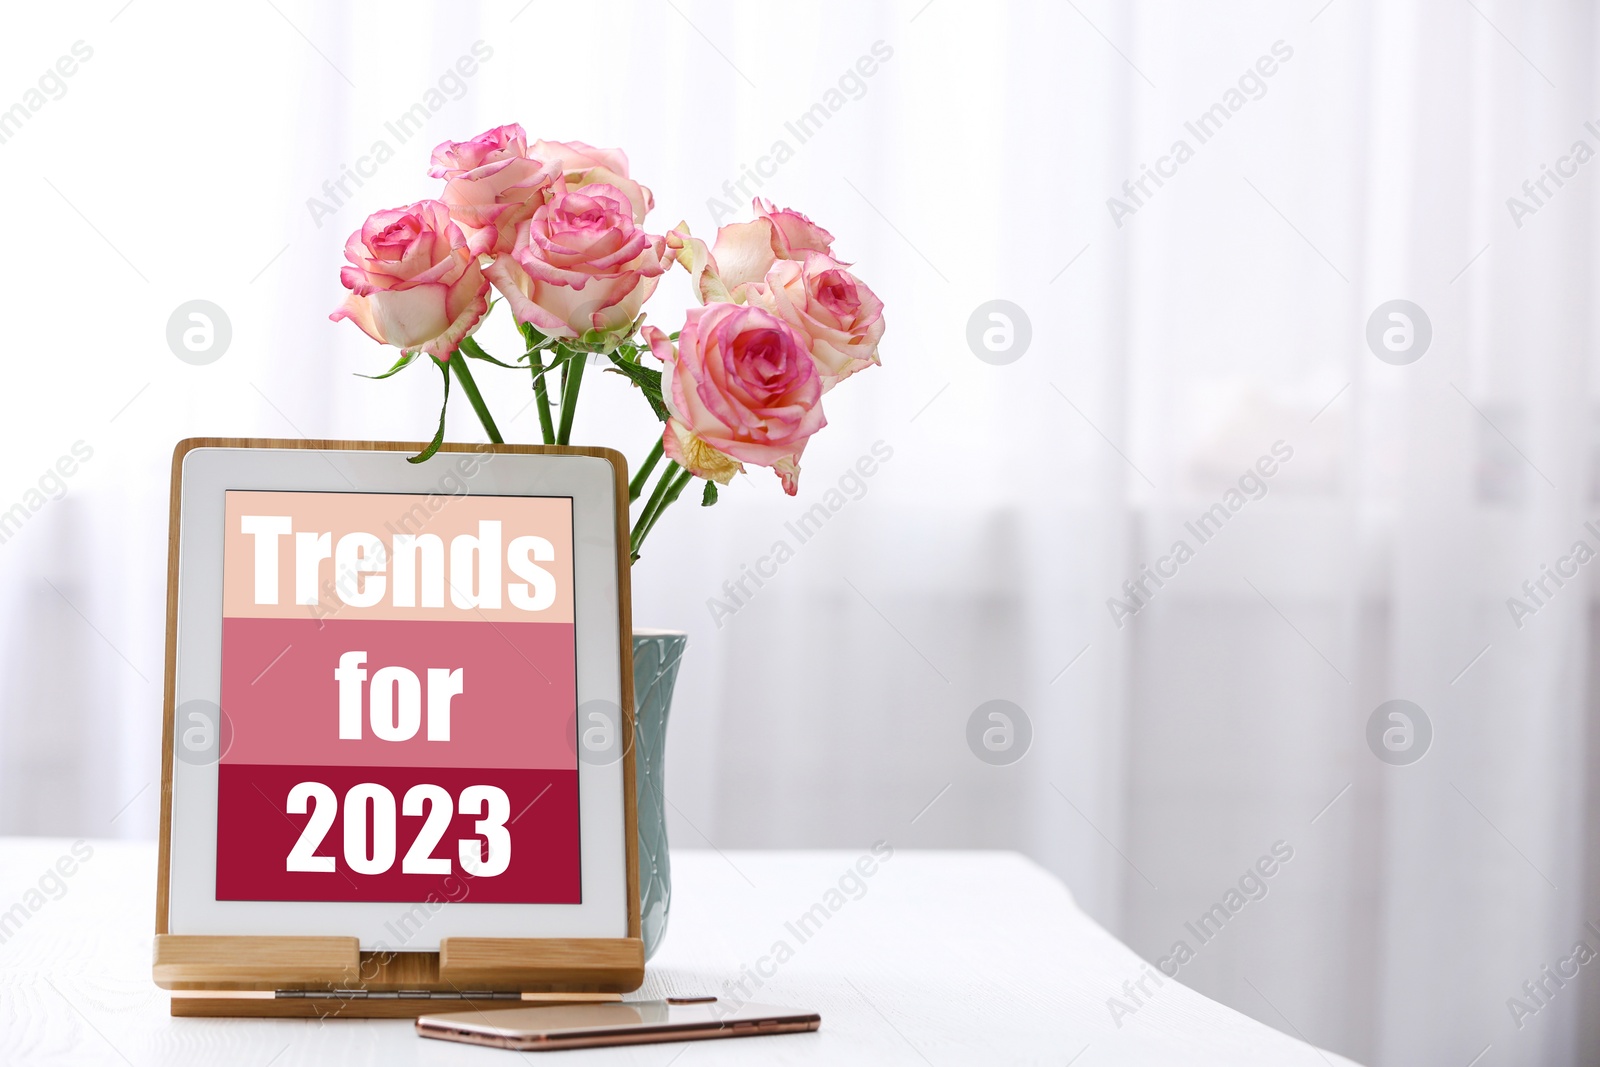 Image of Trends For 2023 text on tablet display. Device, phone and flowers on white table, space for text